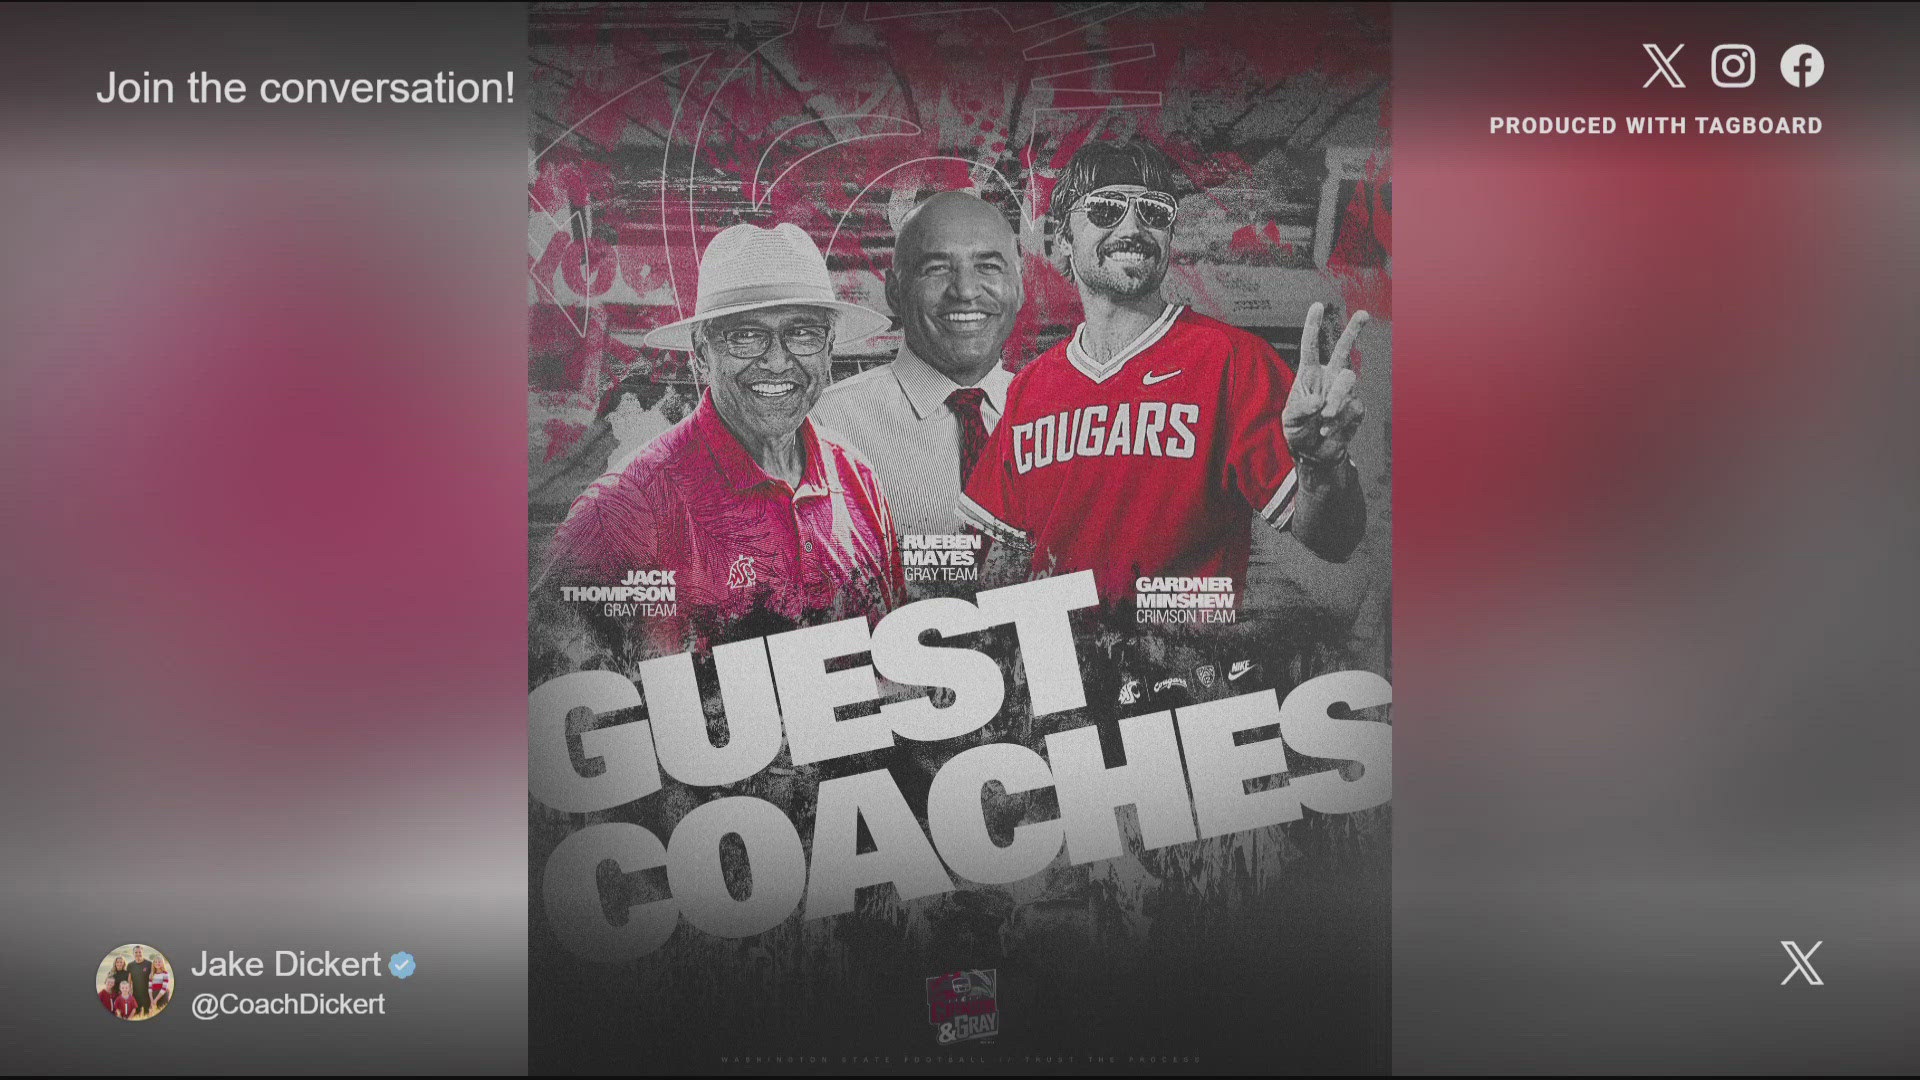 He will be a guest coach alongside several other special guests in Pullman.